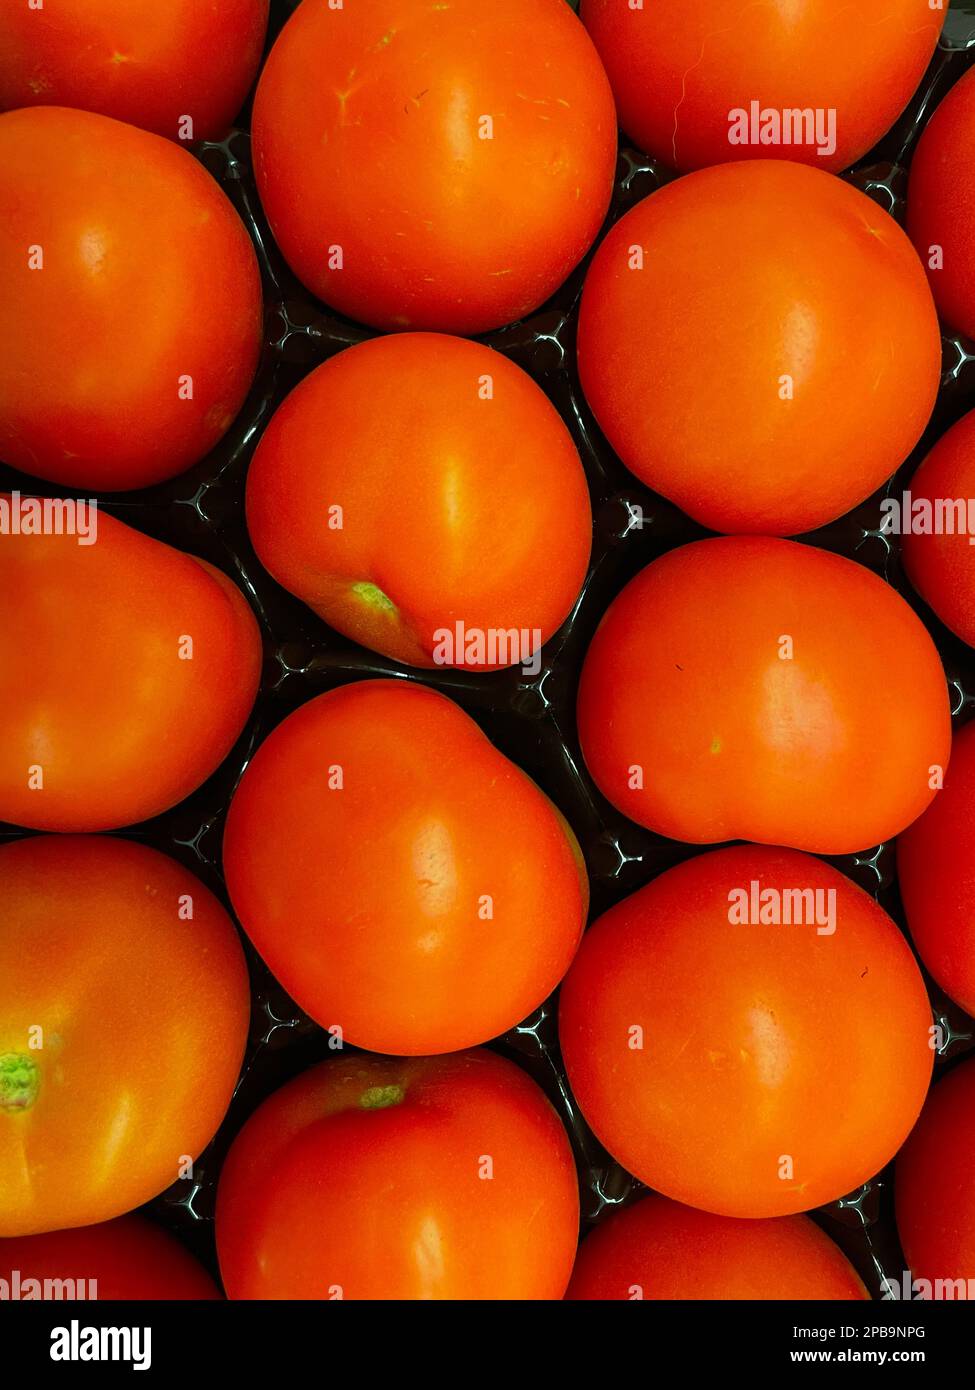 tomatoes.  The tomato is the edible berry of the plant Solanum lycopersicum, commonly known as the tomato plant. The species originated in weste Stock Photo